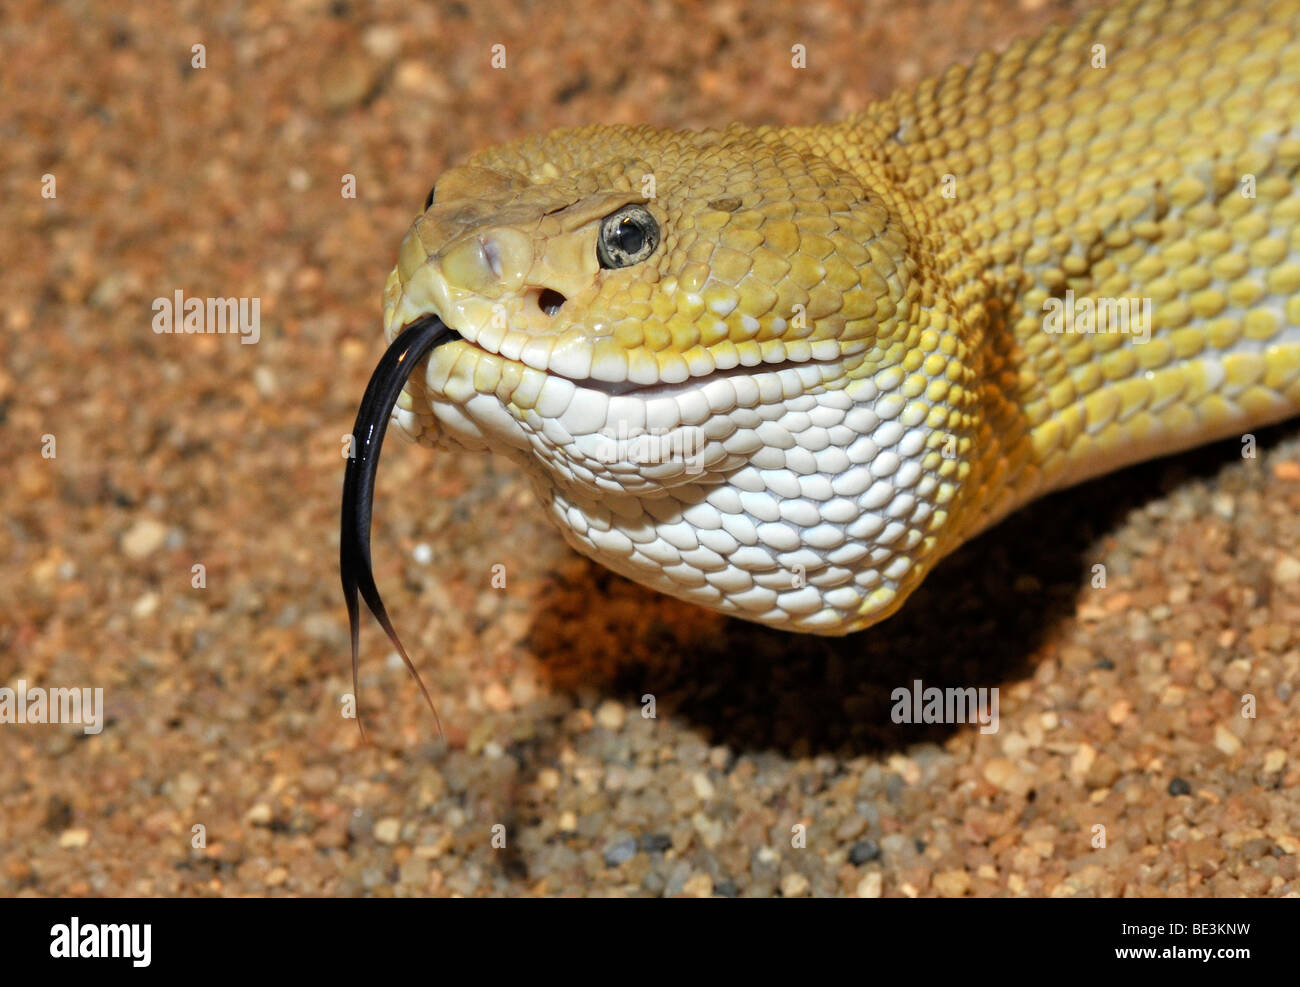 Mexican West Coast Rattlesnake (Crotalus basiliscus), darting its tongue in and out, West Mexico Stock Photo